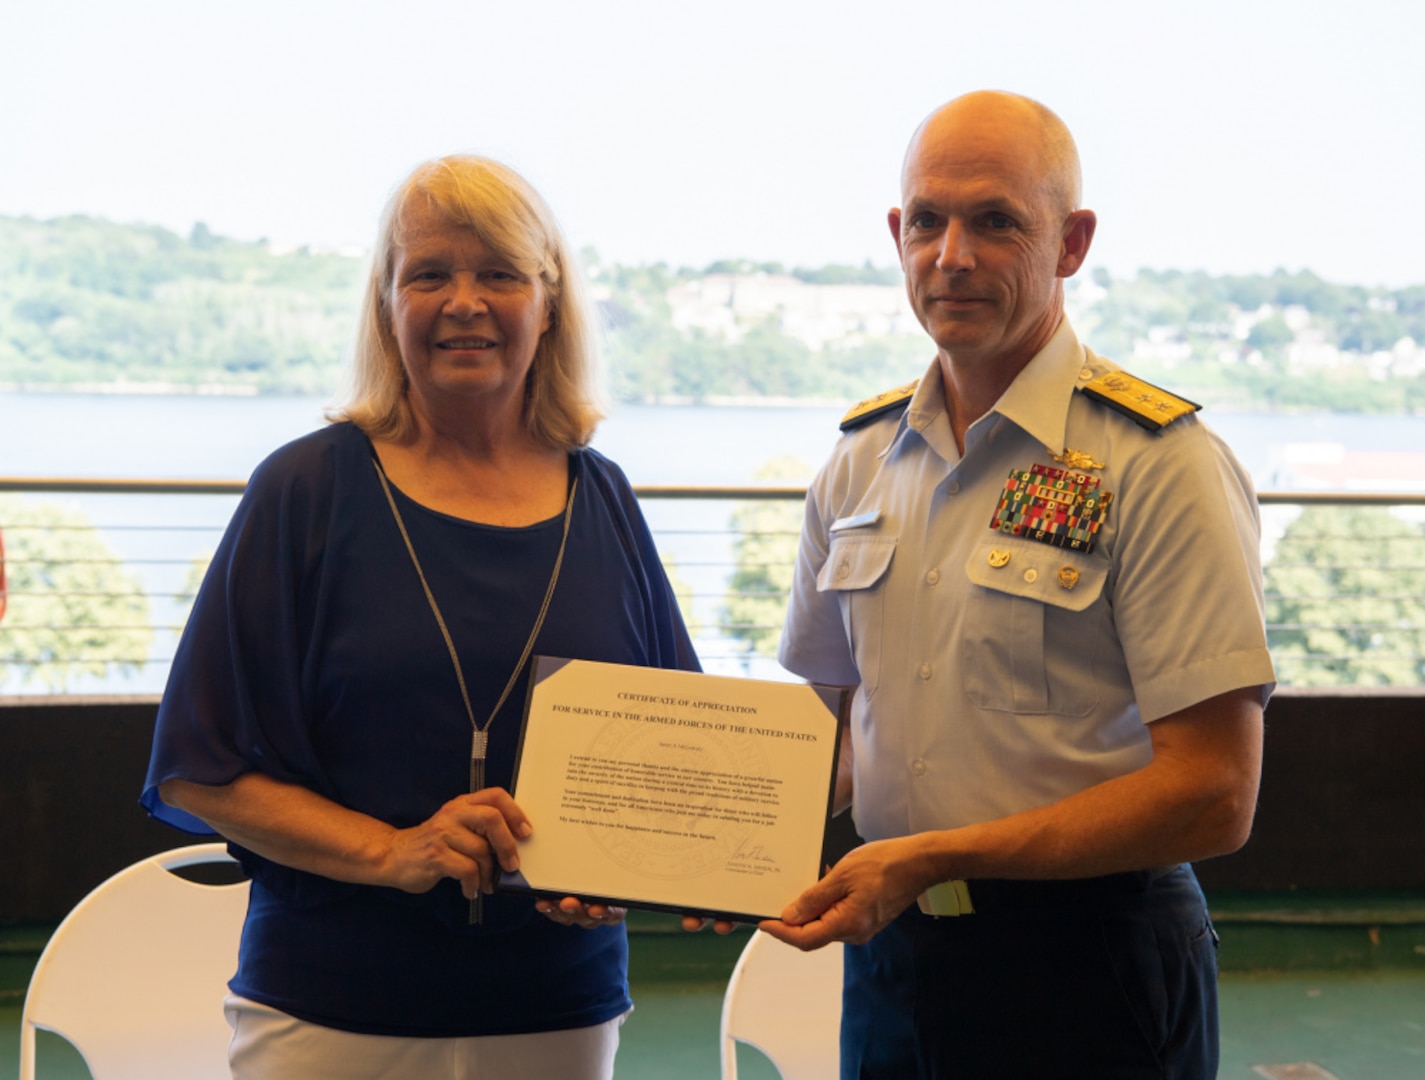 Professor Janet McLeavey at her retirement ceremony, Aug. 11, 2021. McLeavey became the first female faculty member to be employed by the Coast Guard Academy in 1974 and subsequently served for 37 years. (U.S. Coast Guard photo by Petty Officer 3rd Class Matthew Abban).